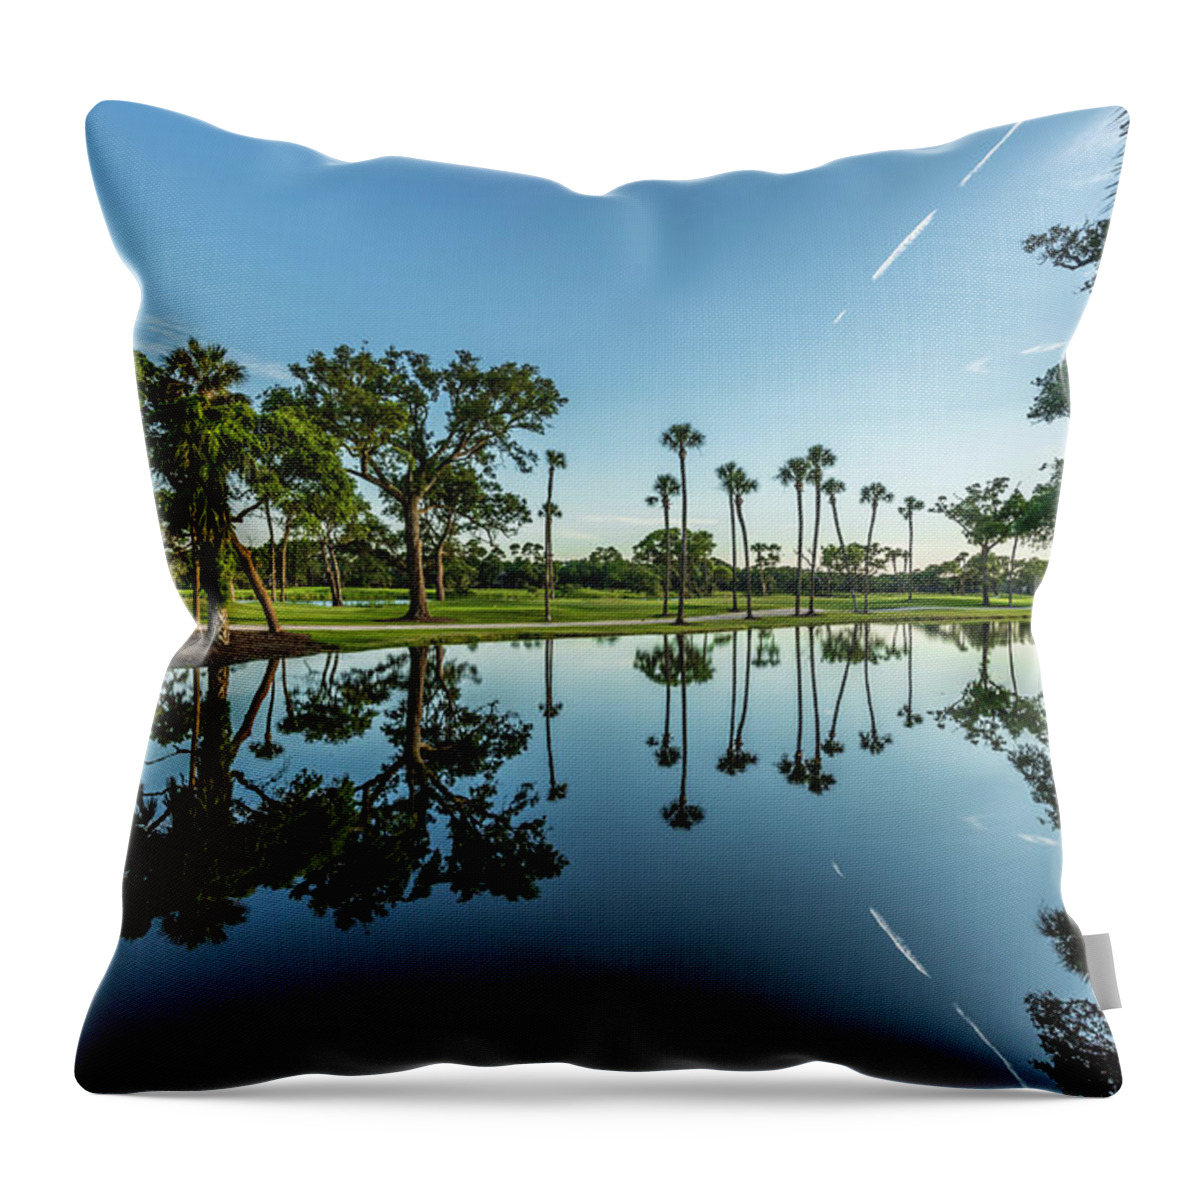 Kiawah Throw Pillow featuring the photograph Osprey Point Kiawah Island Resort by Donnie Whitaker